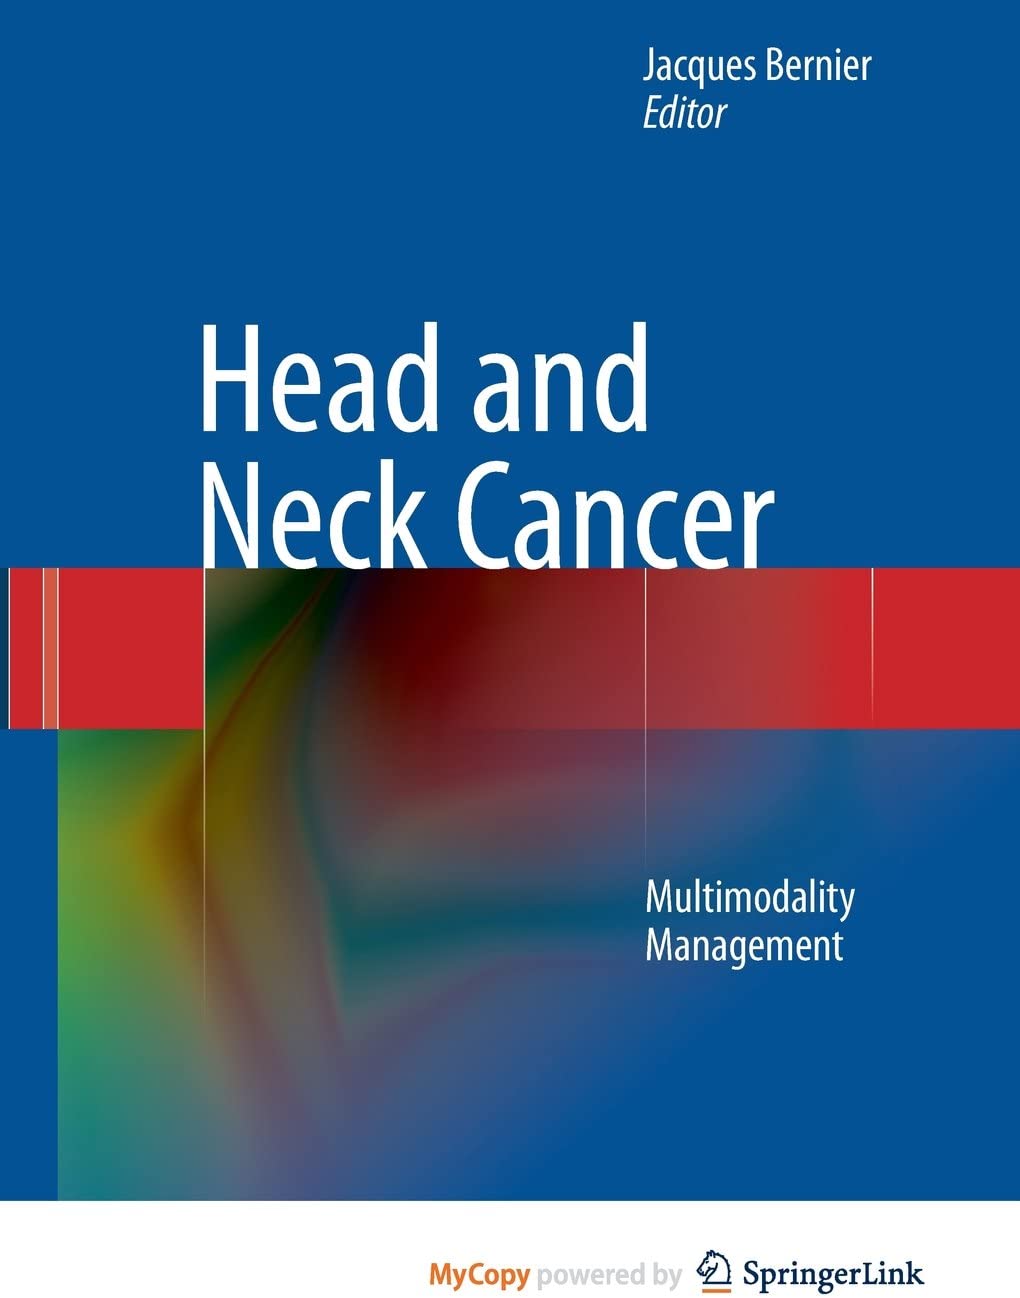 Head and Neck Cancer: Multimodality Management